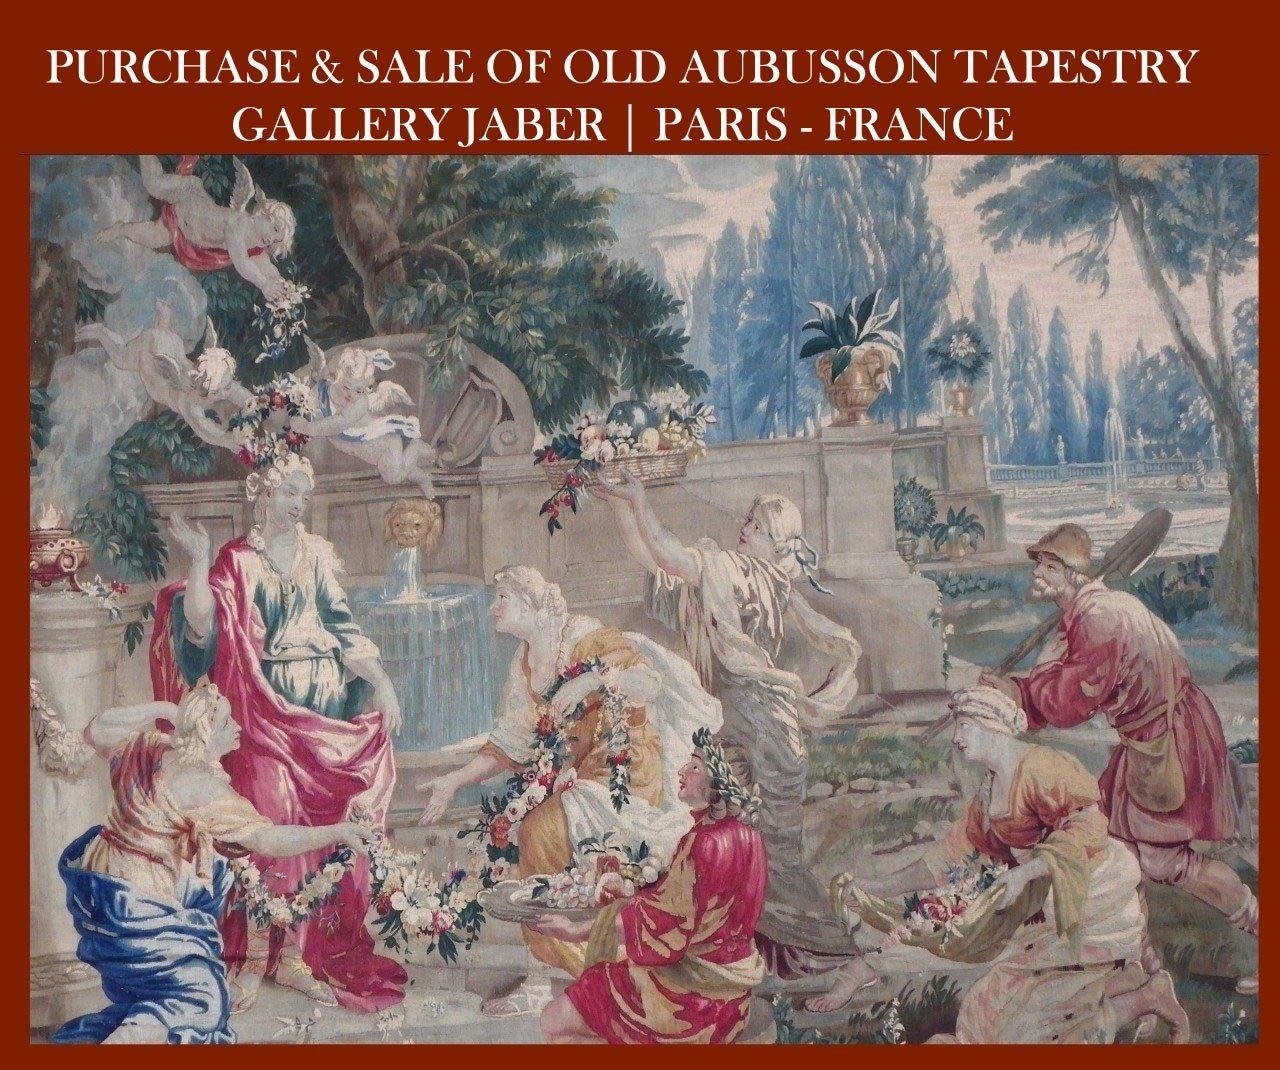 PURCHASE OLD AUBUSSON TAPESTRY IN PARIS